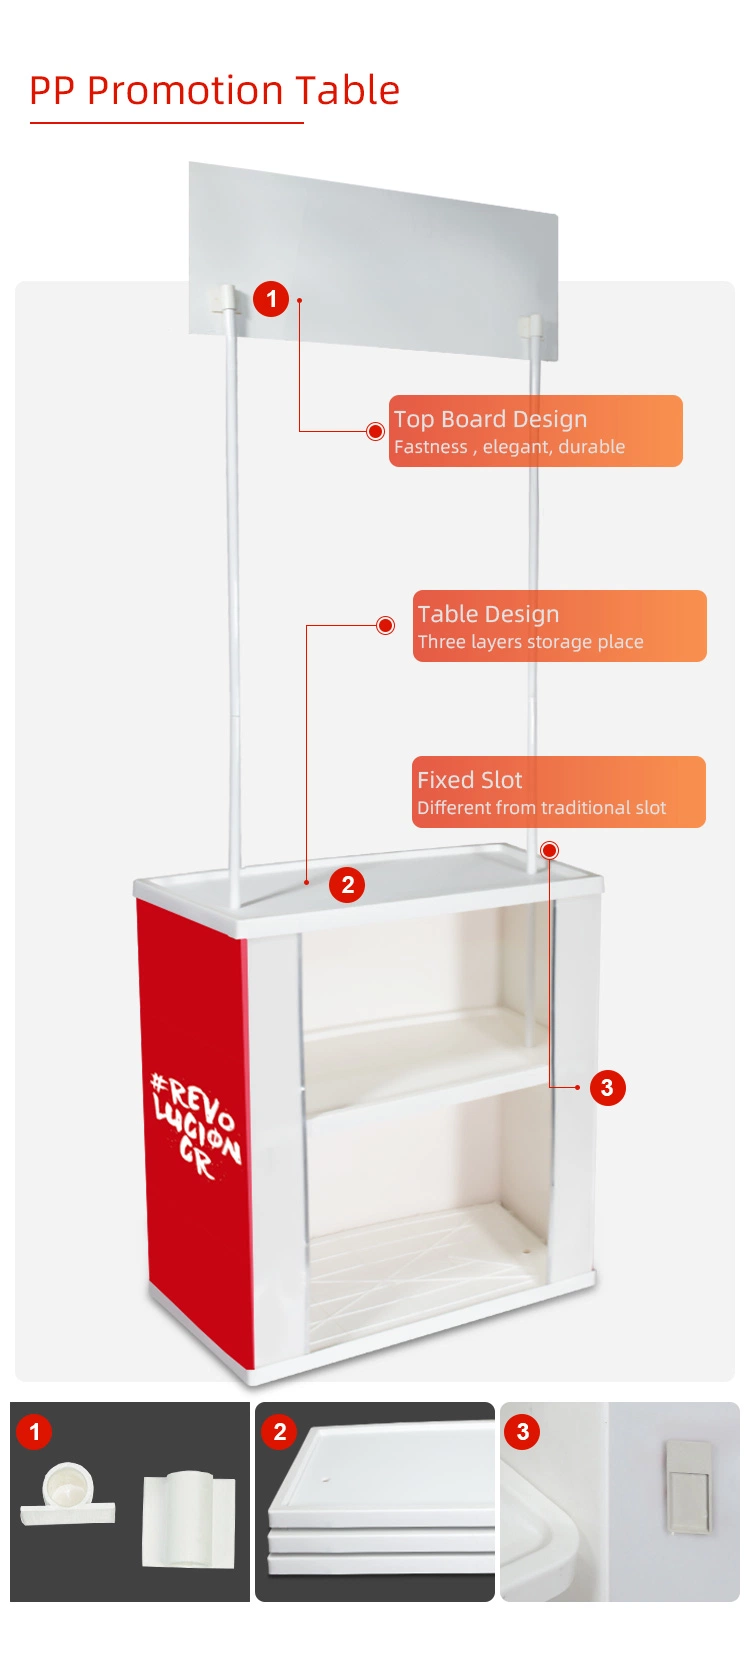 Hot Sale Trade Show Booth Tension Fabric Square Counter with Acrylic Display Rack Exhibition Booth Promotion Table